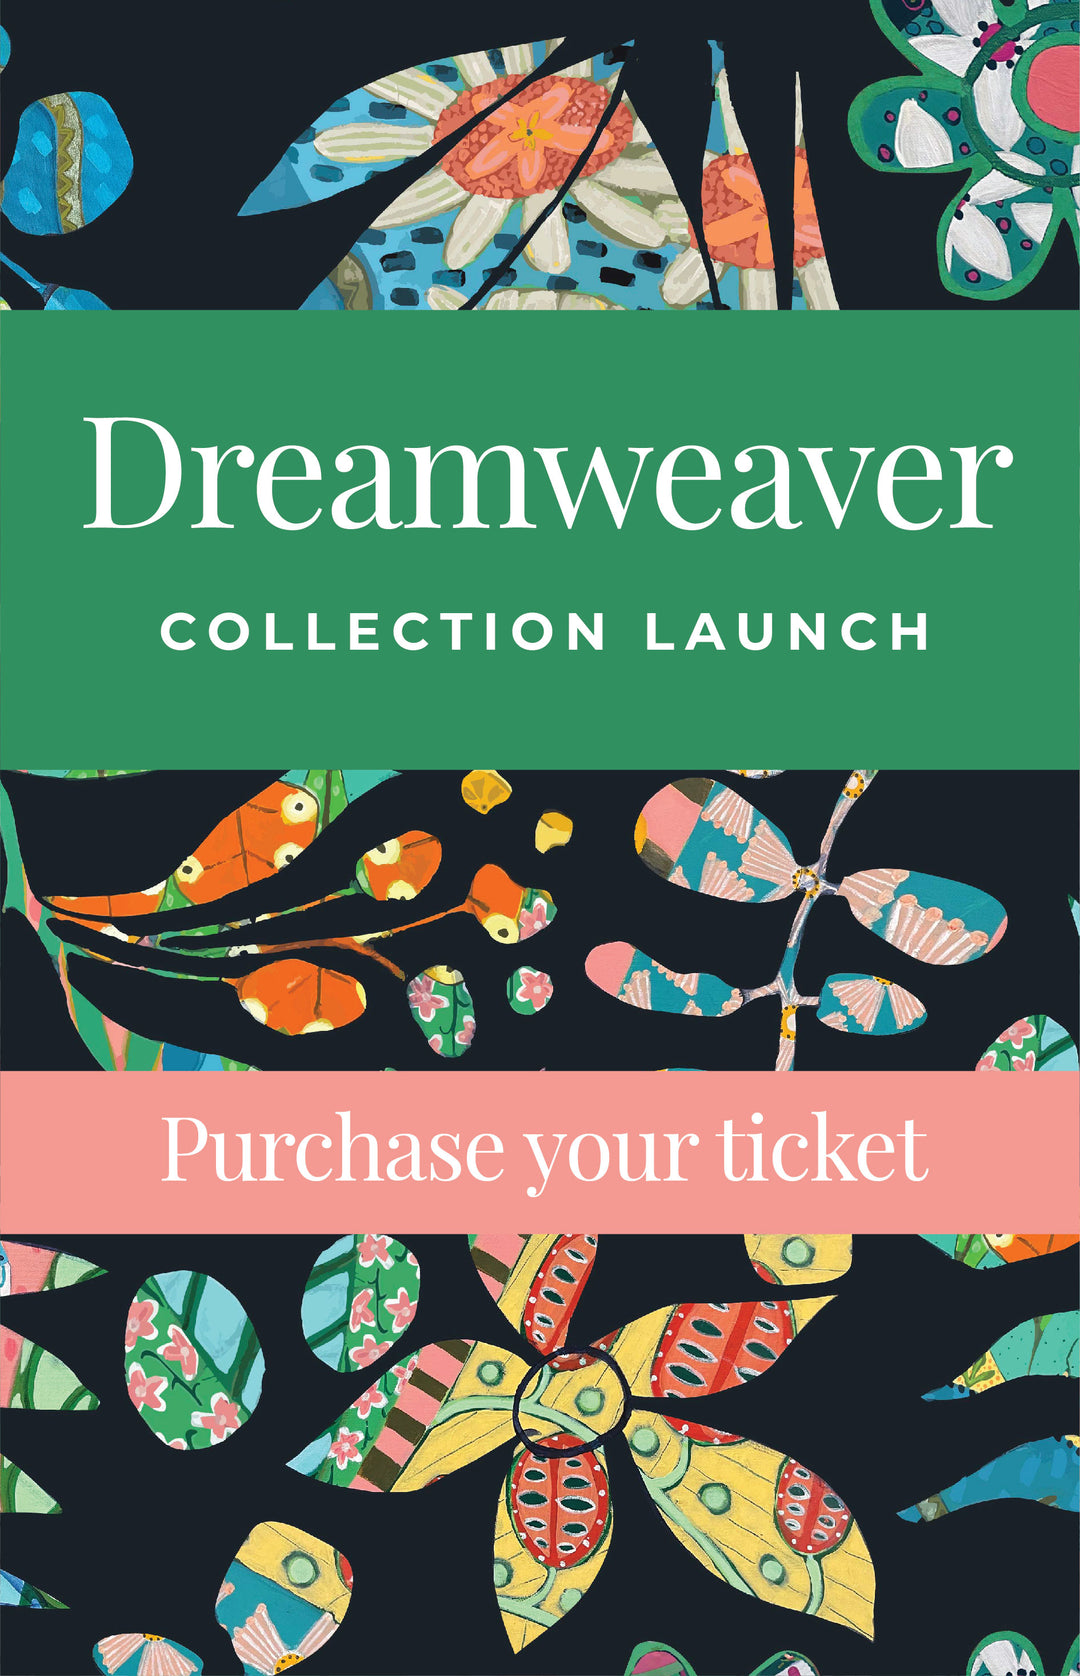 DO NOT ARCHIVE OR DELETE - Dreamweaver Launch Event Ticket